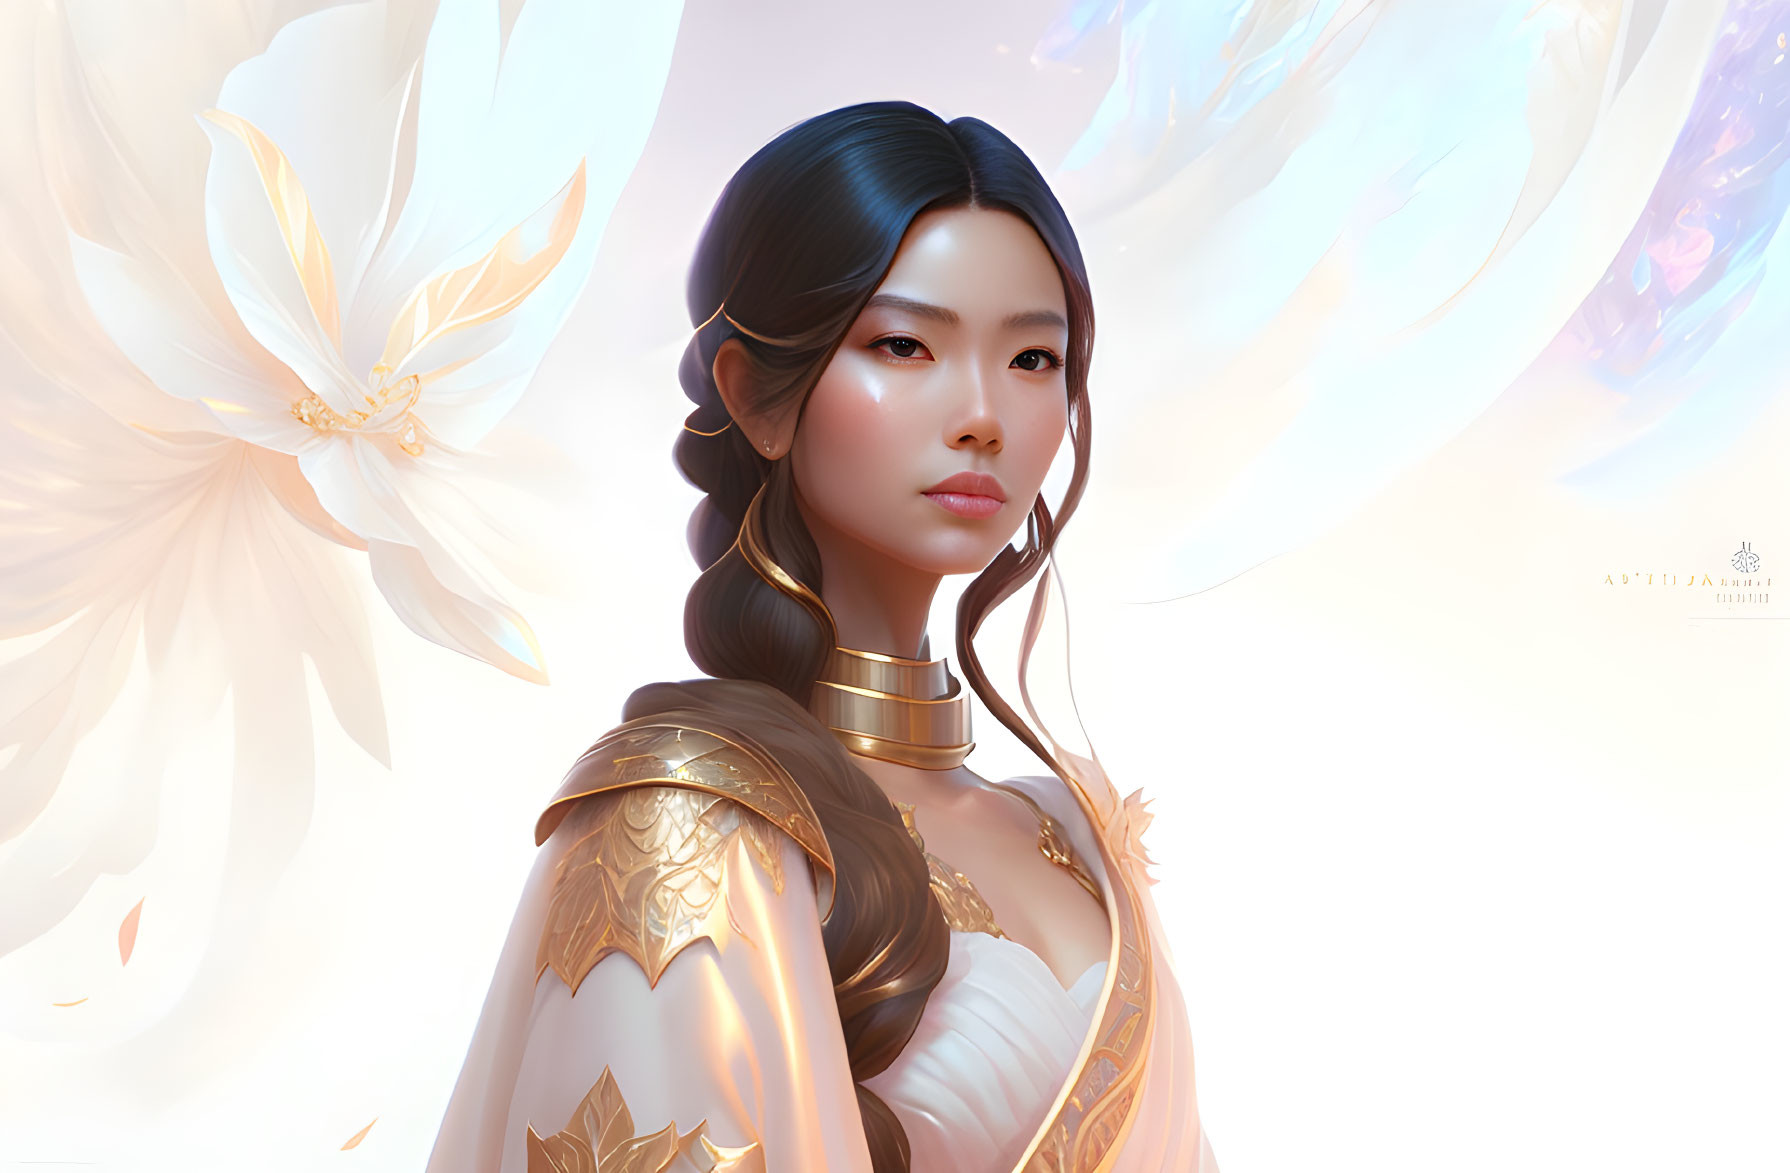 Digital artwork: Asian woman in golden armor with white wings